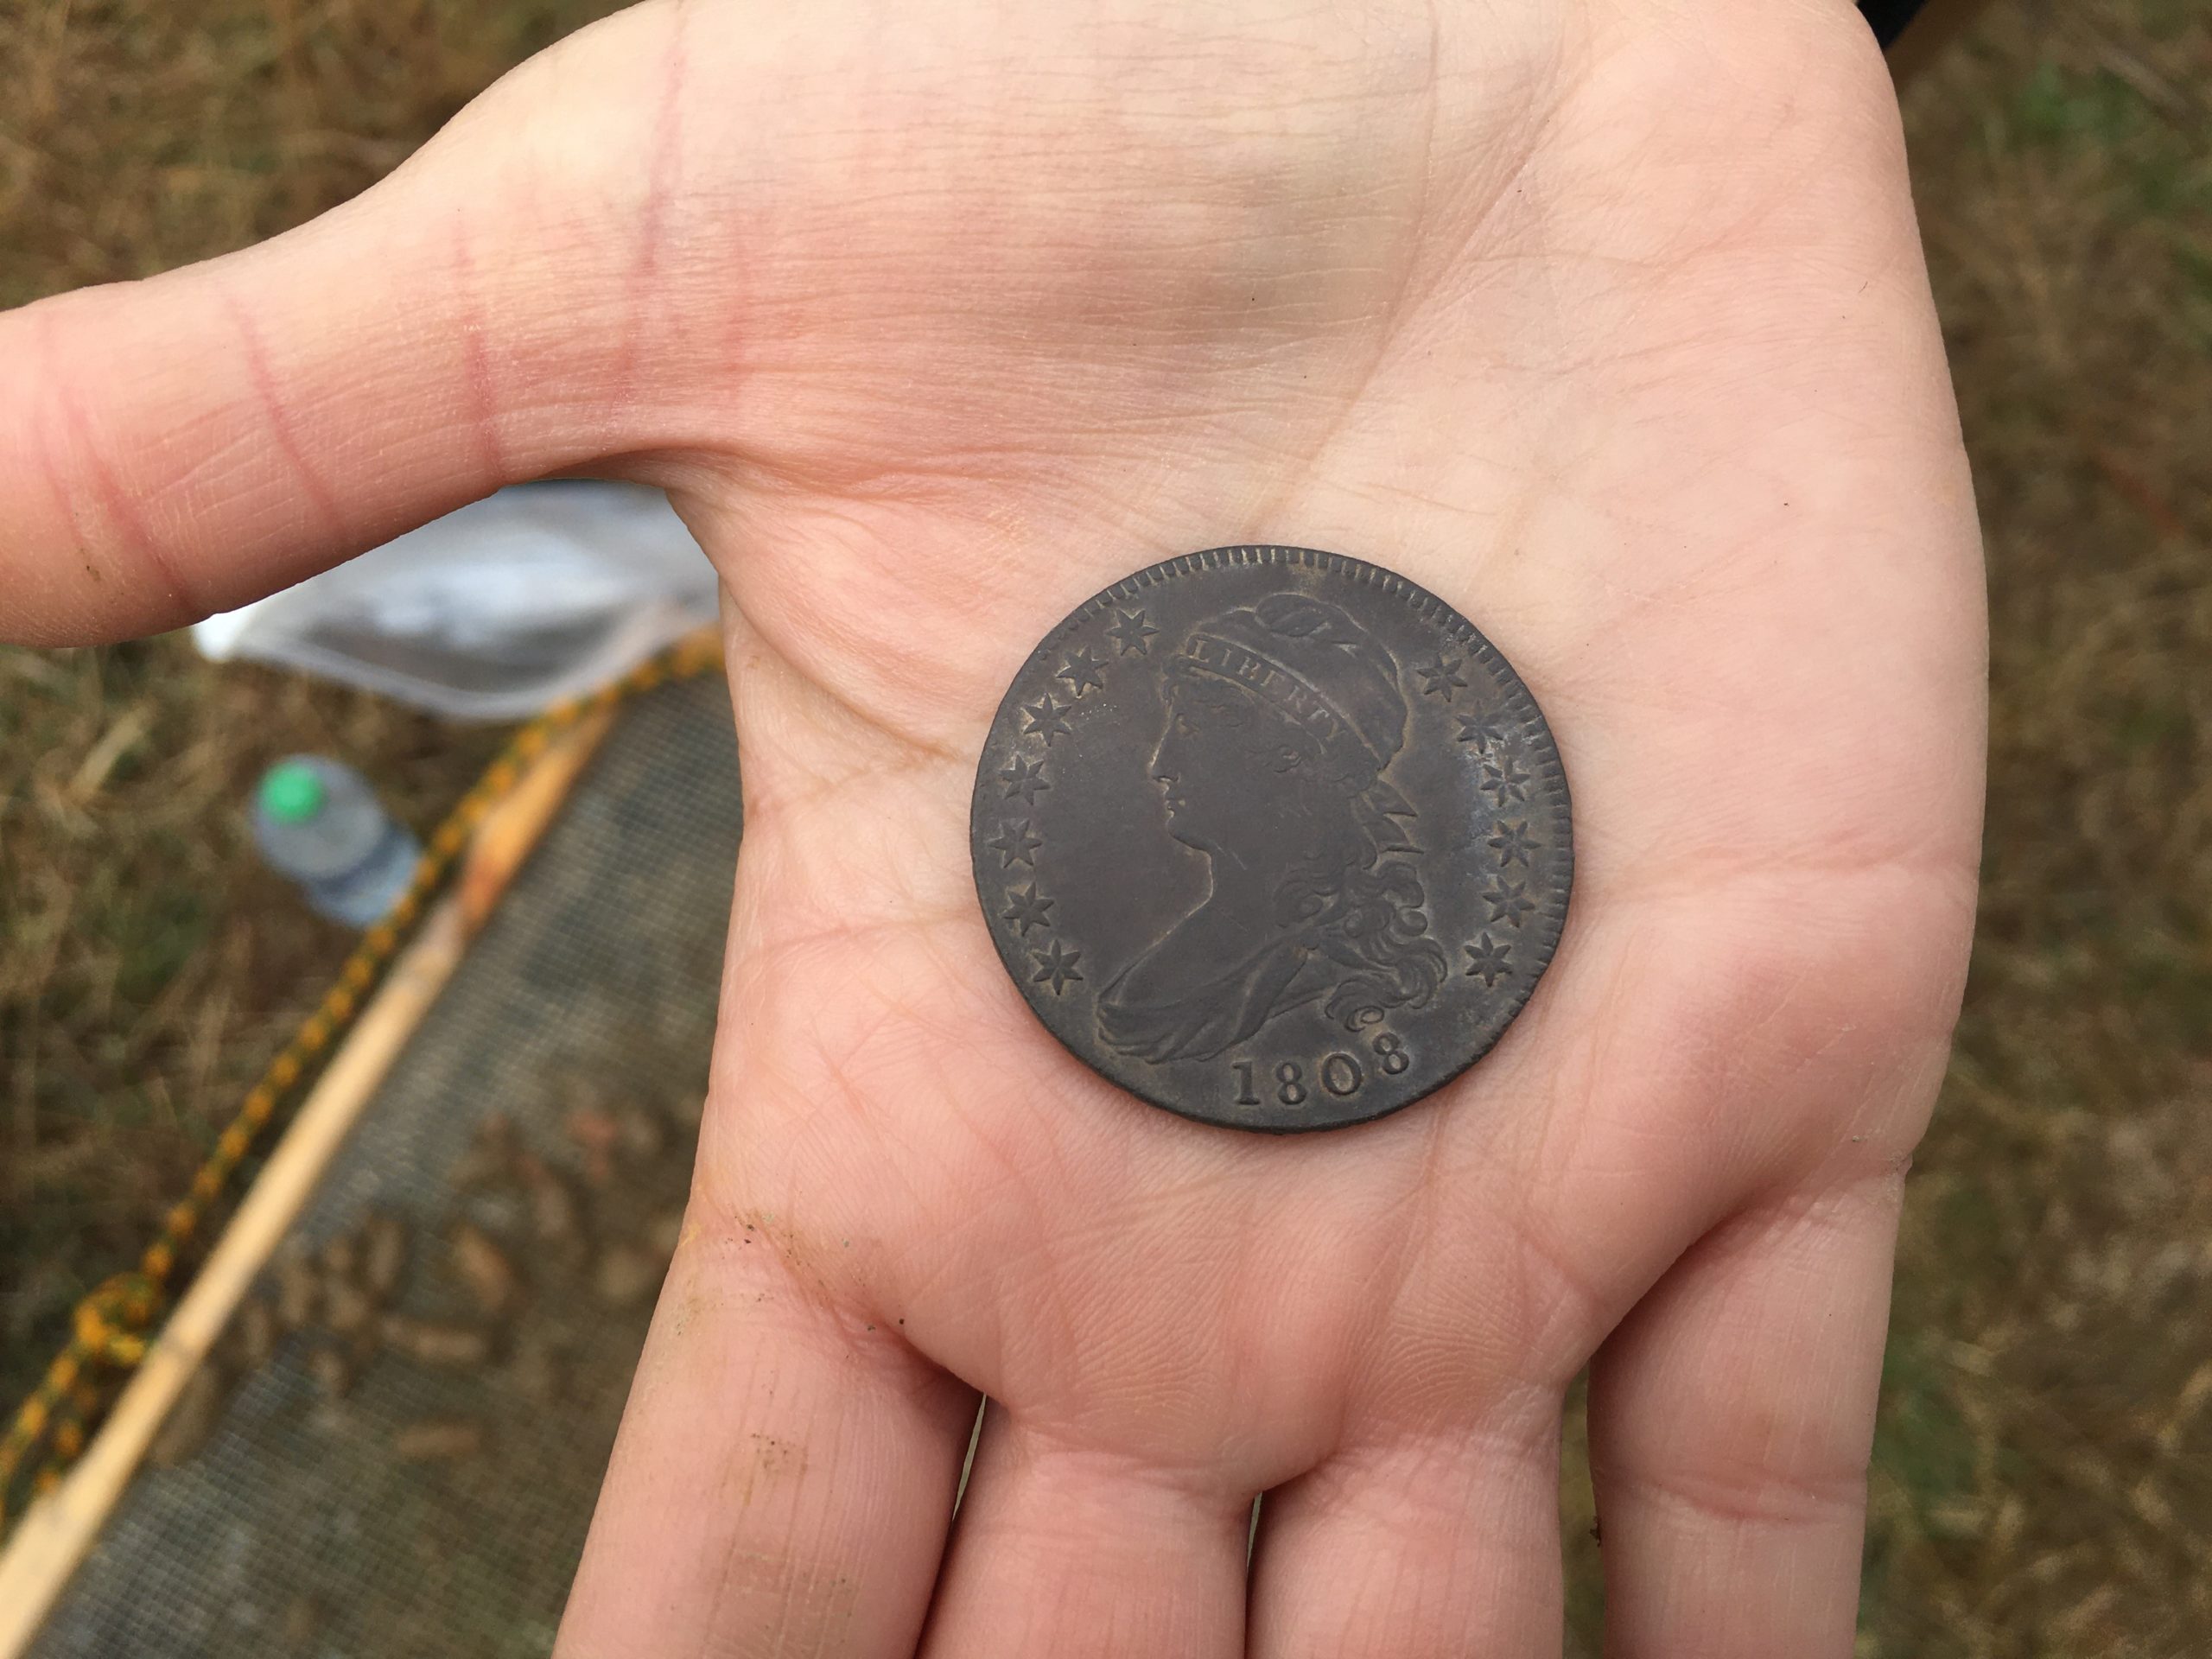  A coin dating to 1808 was found near the site of Ben Ross' homestead [Photo credit: Maryland Department of Transportation]